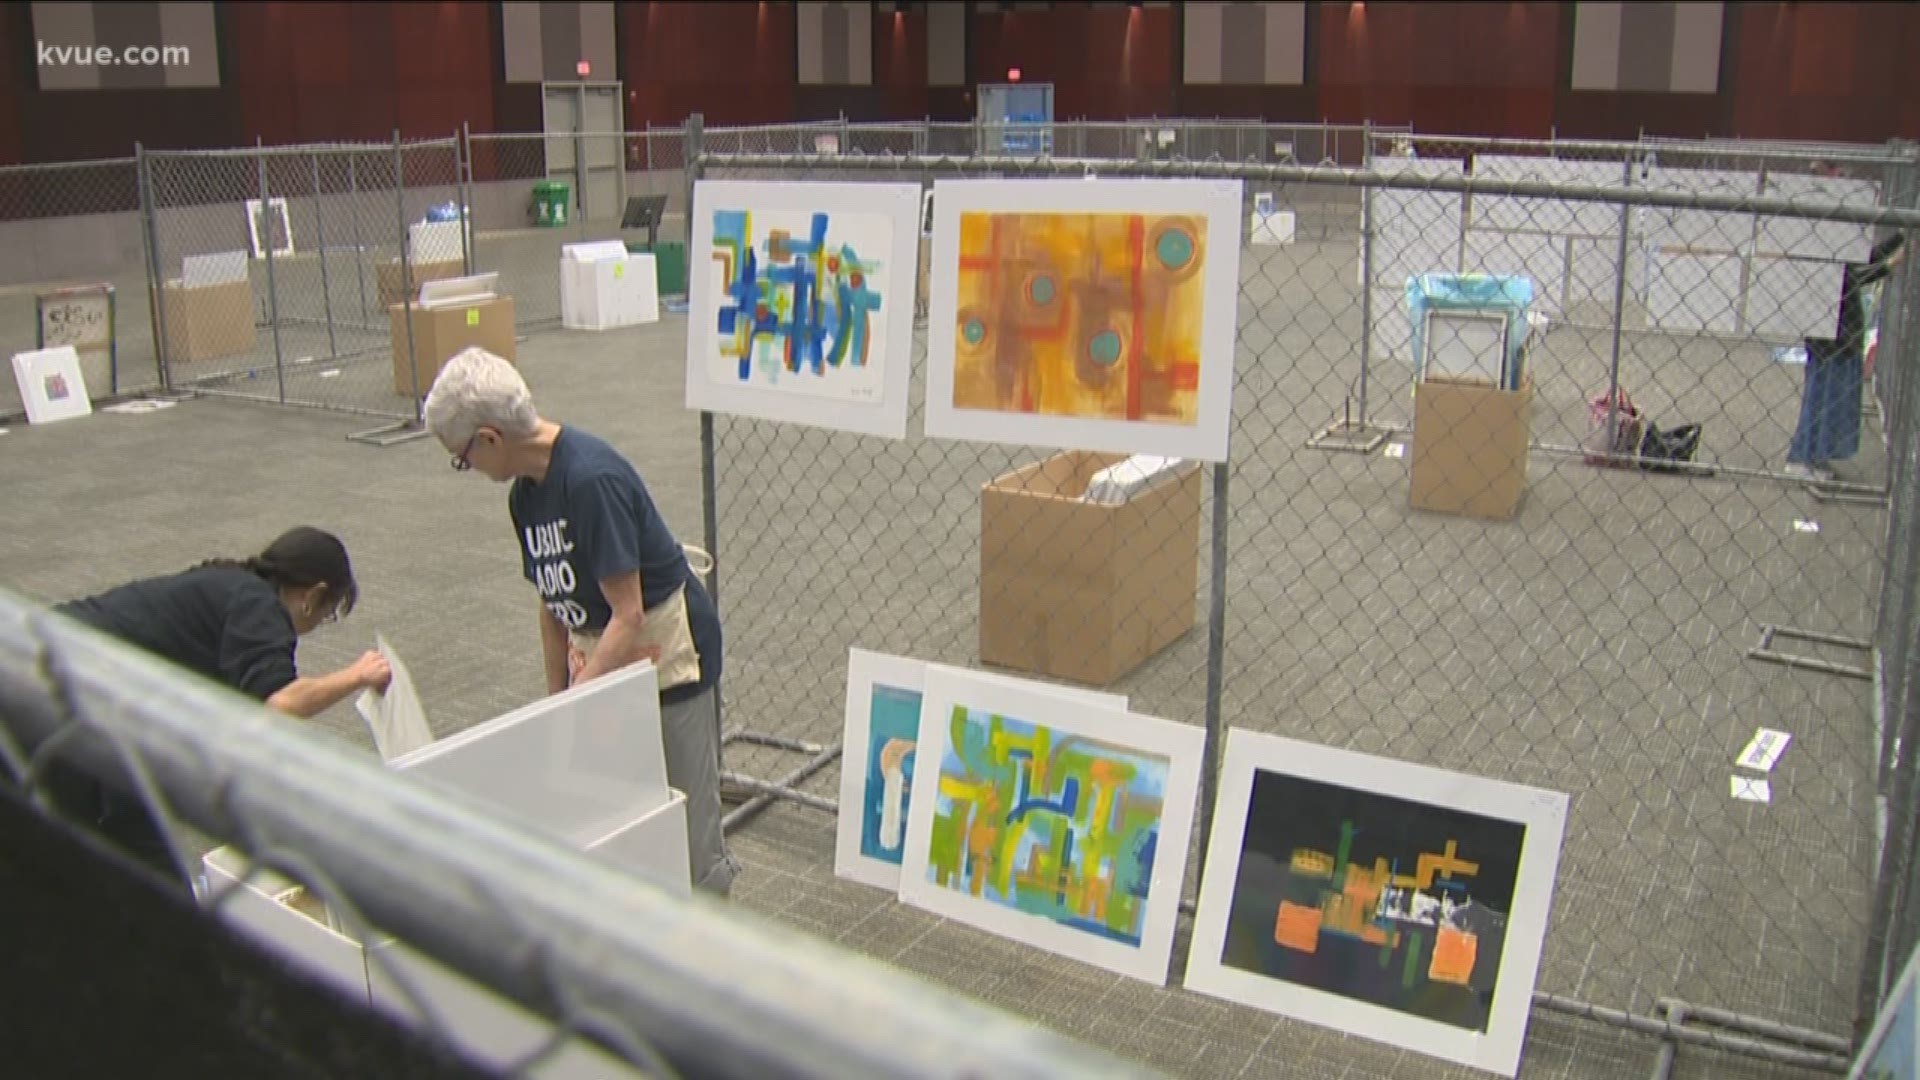 It's a big day at the Austin Convention Center.
As volunteers and artists set up for an art show unlike any other this weekend.
The most inspiring part may be how much it's helping people who need it most.
STORY: http://www.kvue.com/news/local/the-art-fro